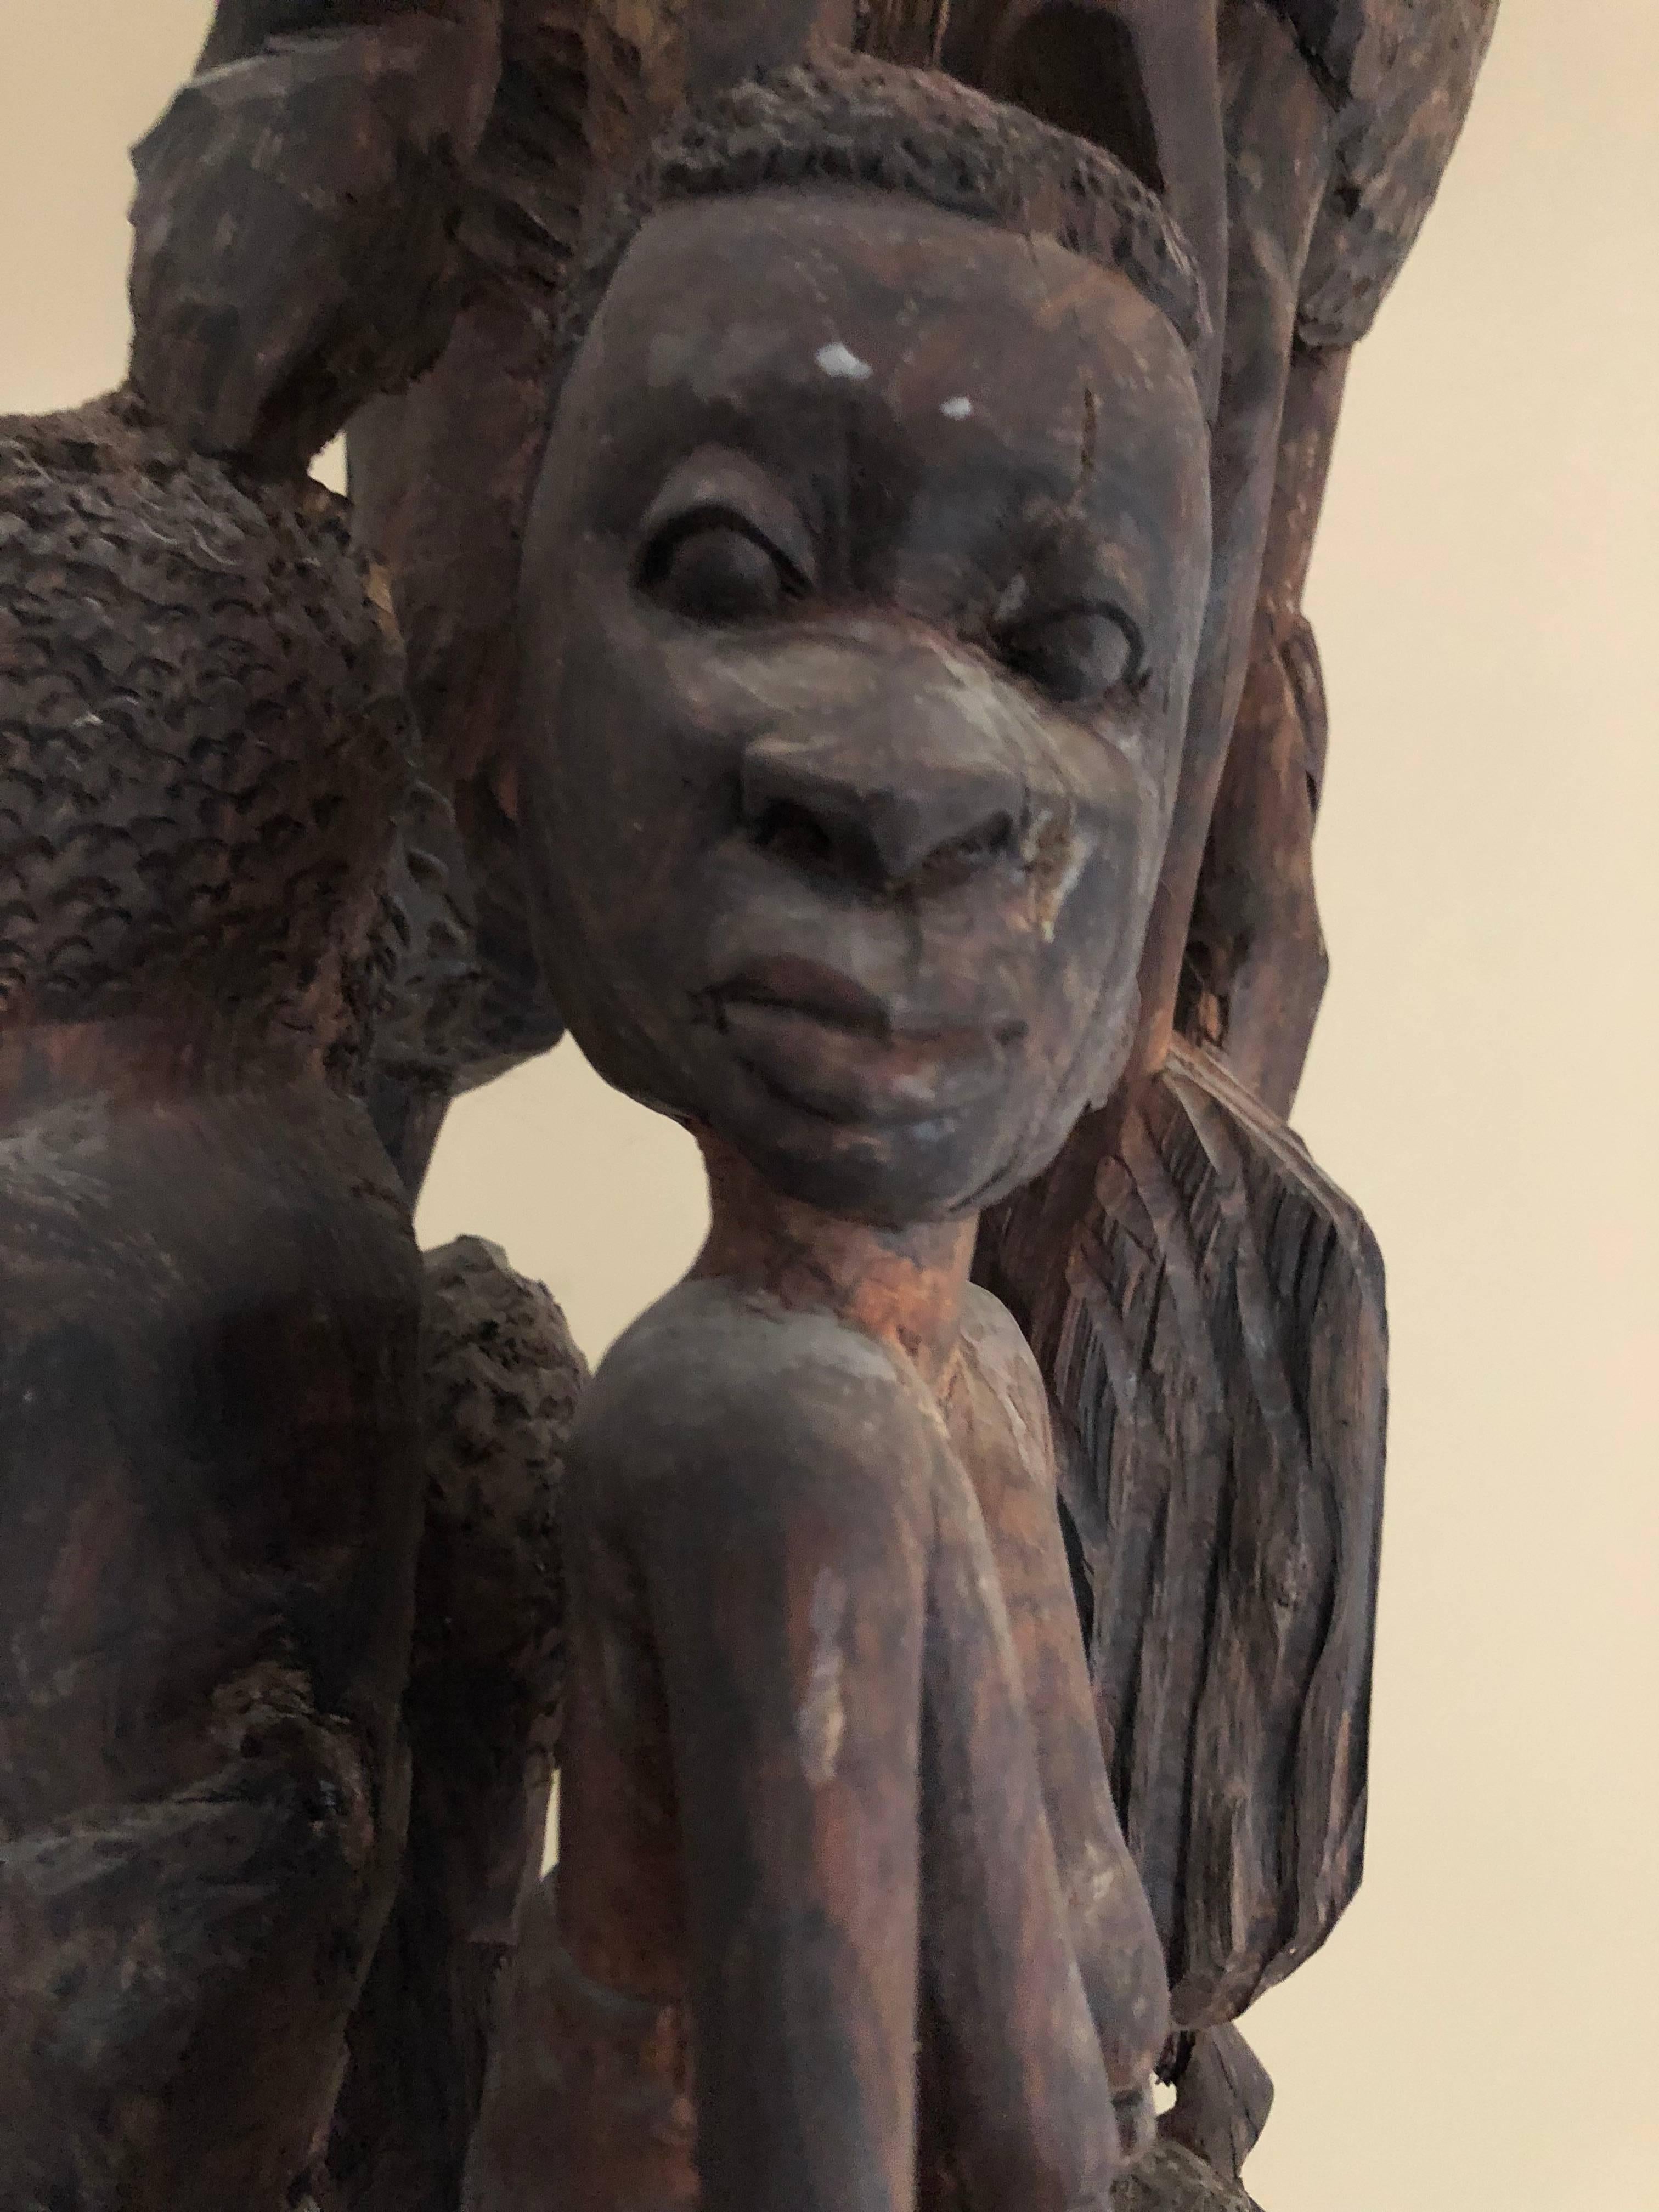 Monumental in size, this hand-carved African sculpture stands 7.5 feet tall and depicts people in various poses. The intricate detail of each person is astounding. The sculpture’s base has been carved from the trunk of a tree. Truly one-of-a-kind.